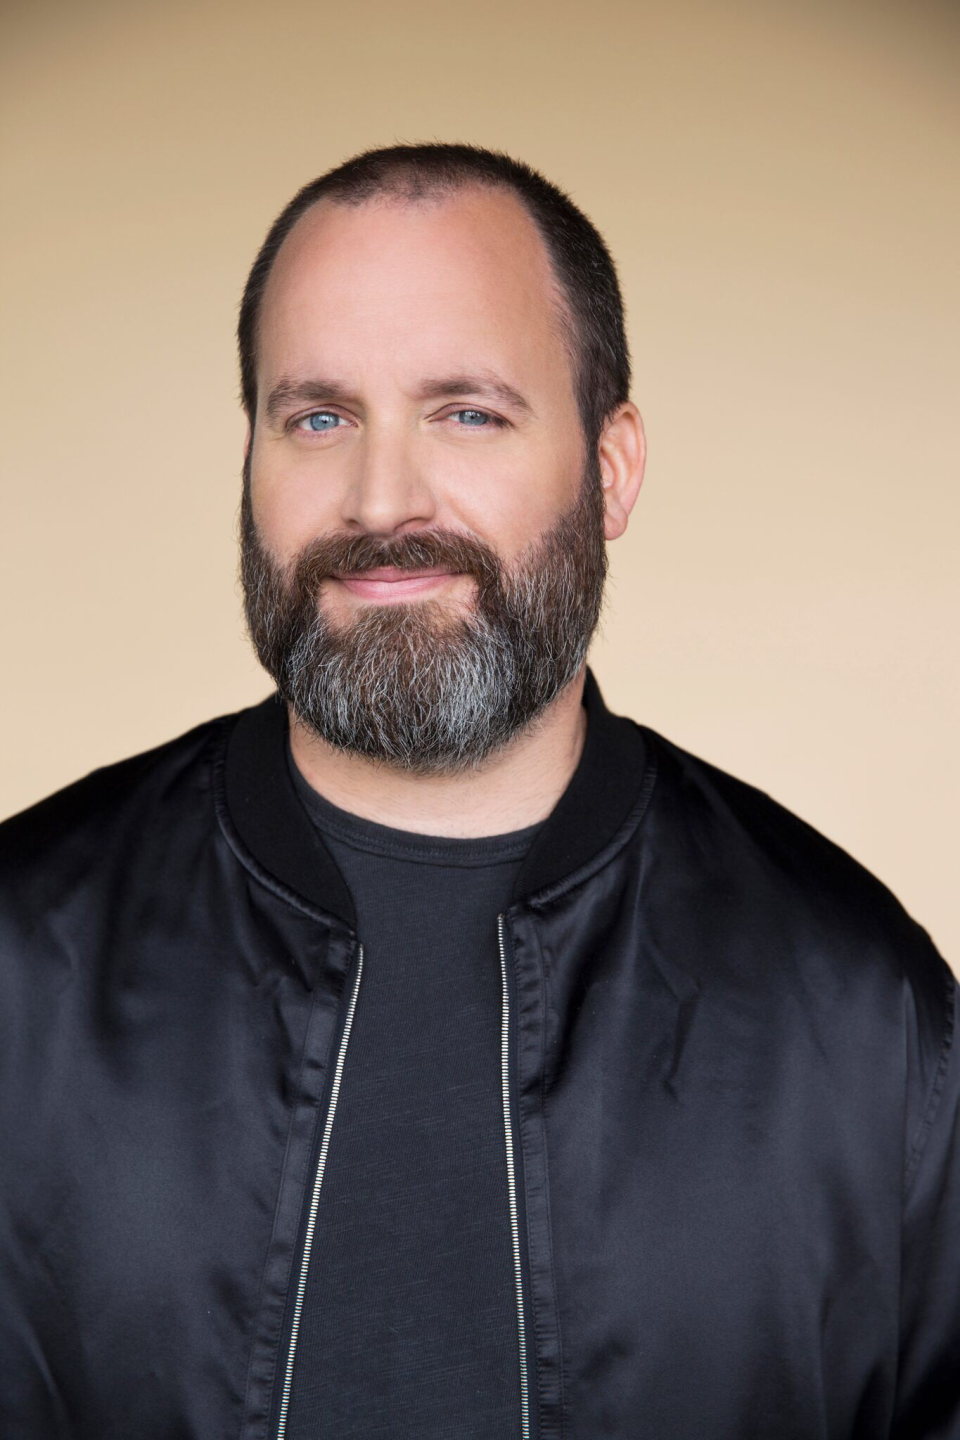 Tom Segura's comedy style is very adult-oriented and is often irreverent, similar to comedians like Patton Oswalt and Christopher Titus.